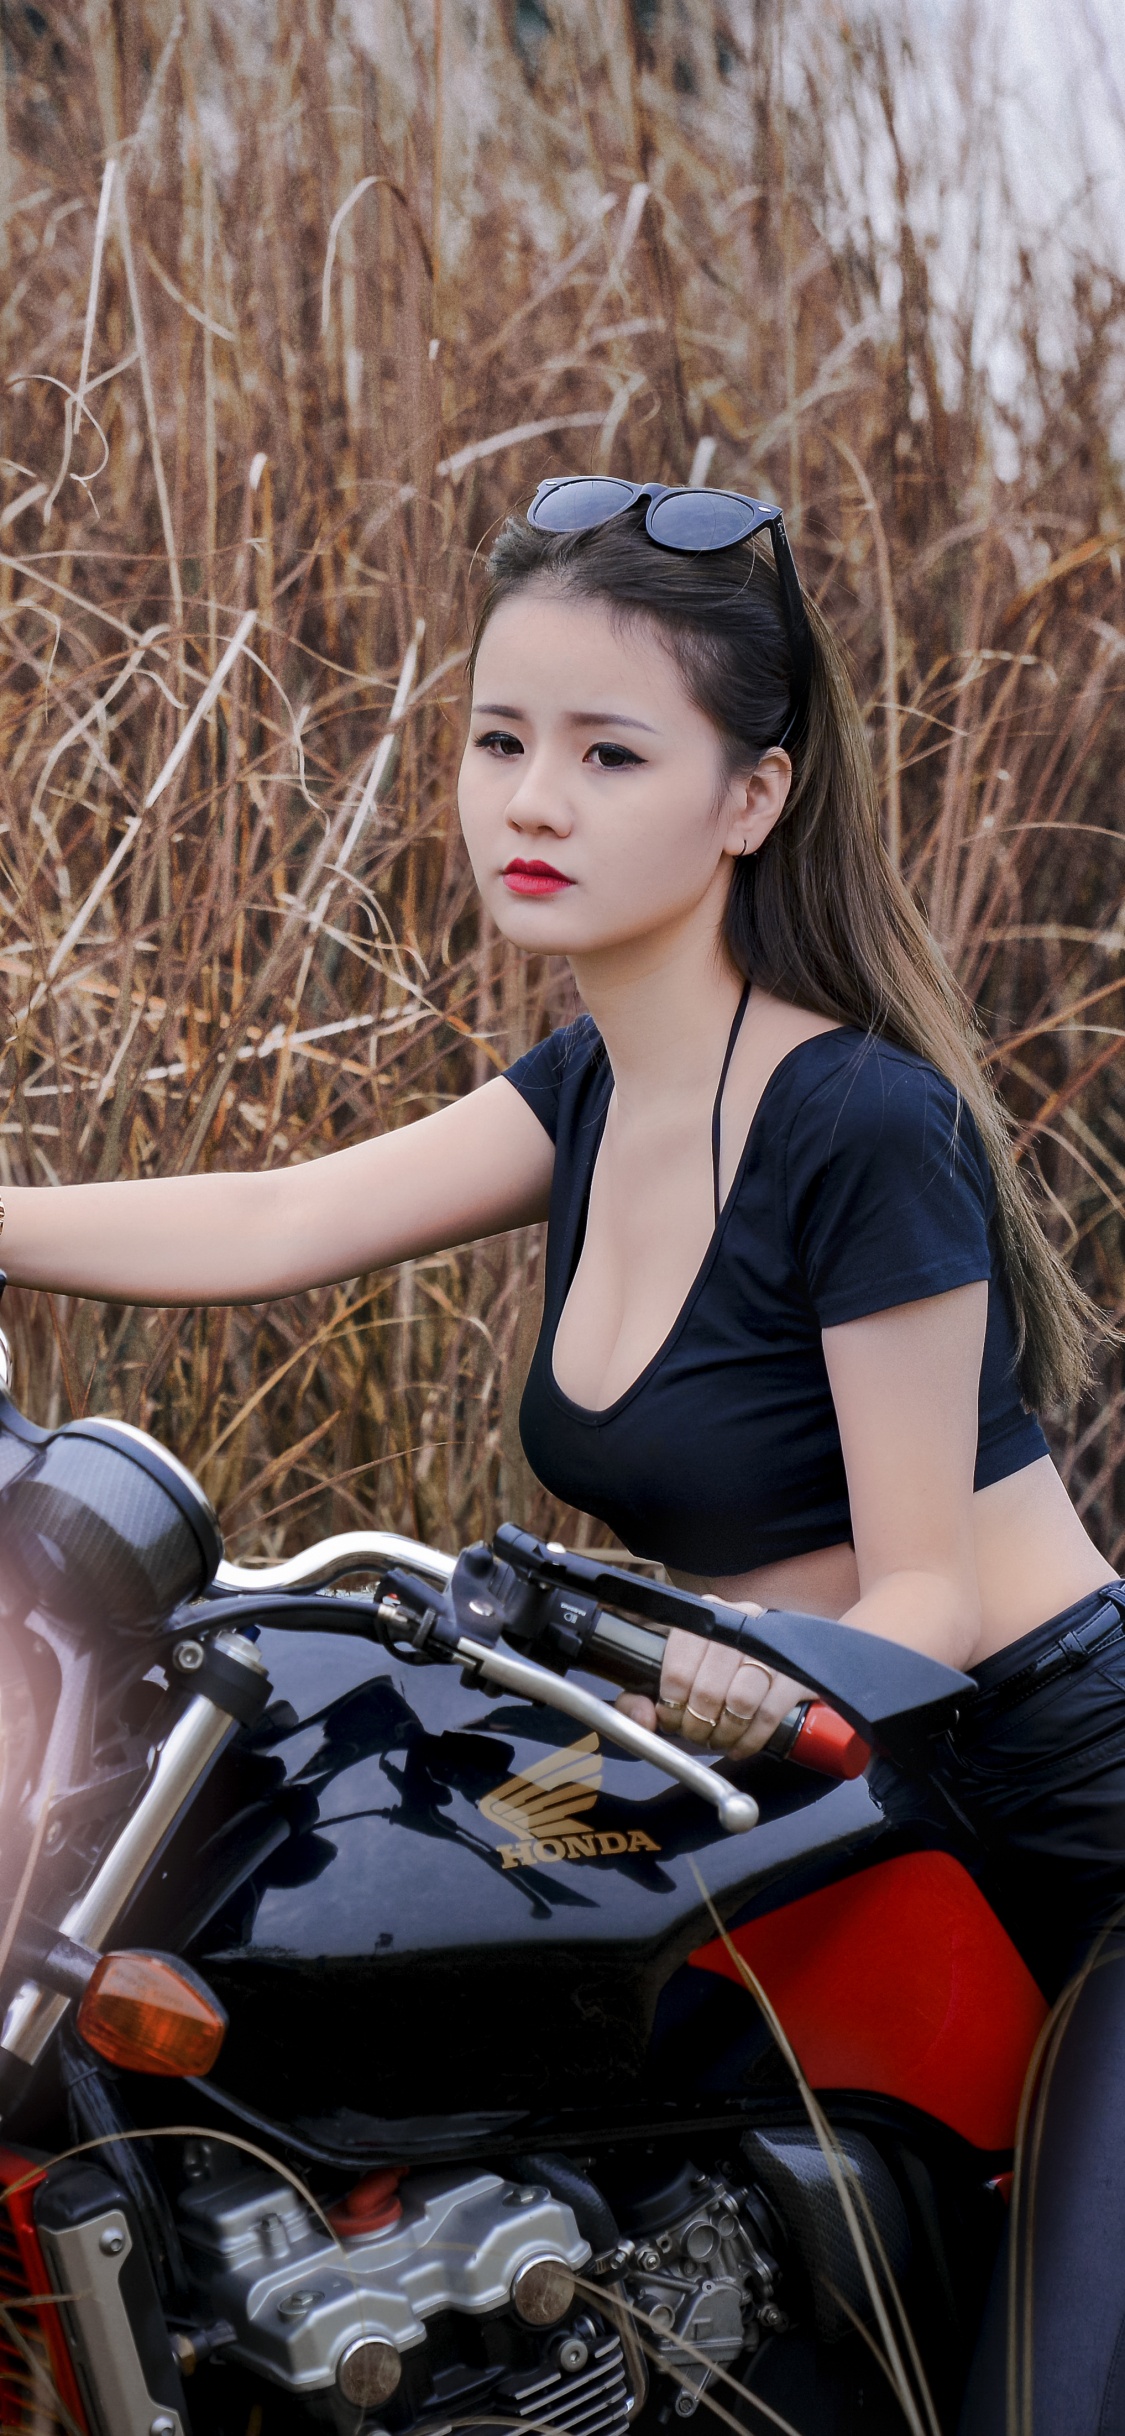 Woman in Black Tank Top and Black Leggings Sitting on Red and Black Motorcycle. Wallpaper in 1125x2436 Resolution